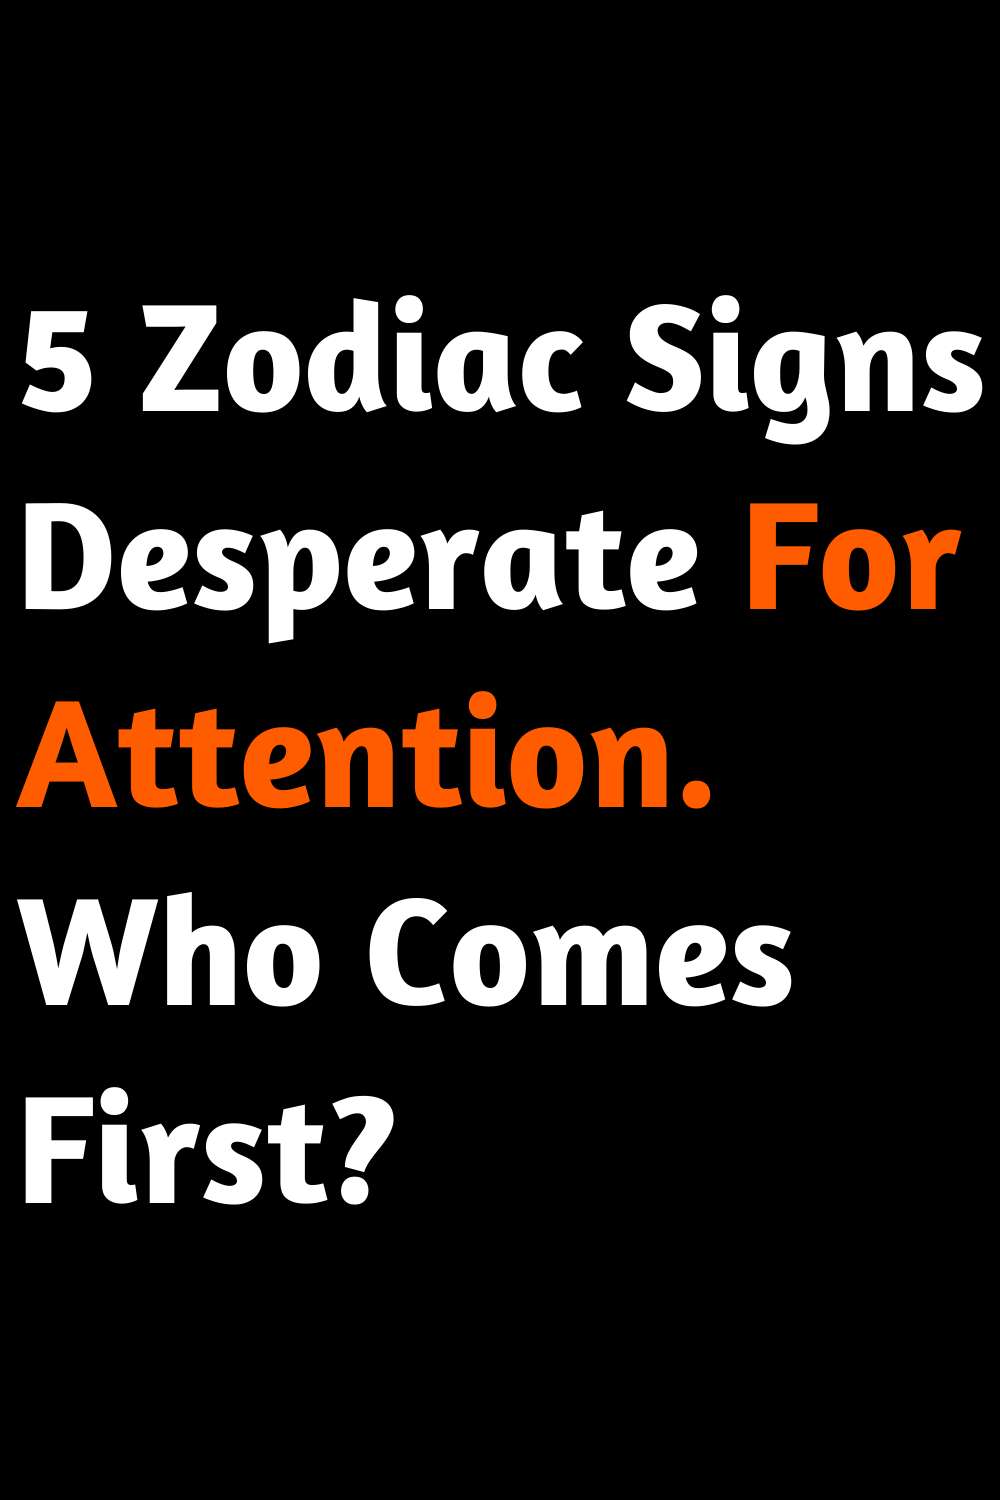 5 Zodiac Signs Desperate For Attention. Who Comes First?